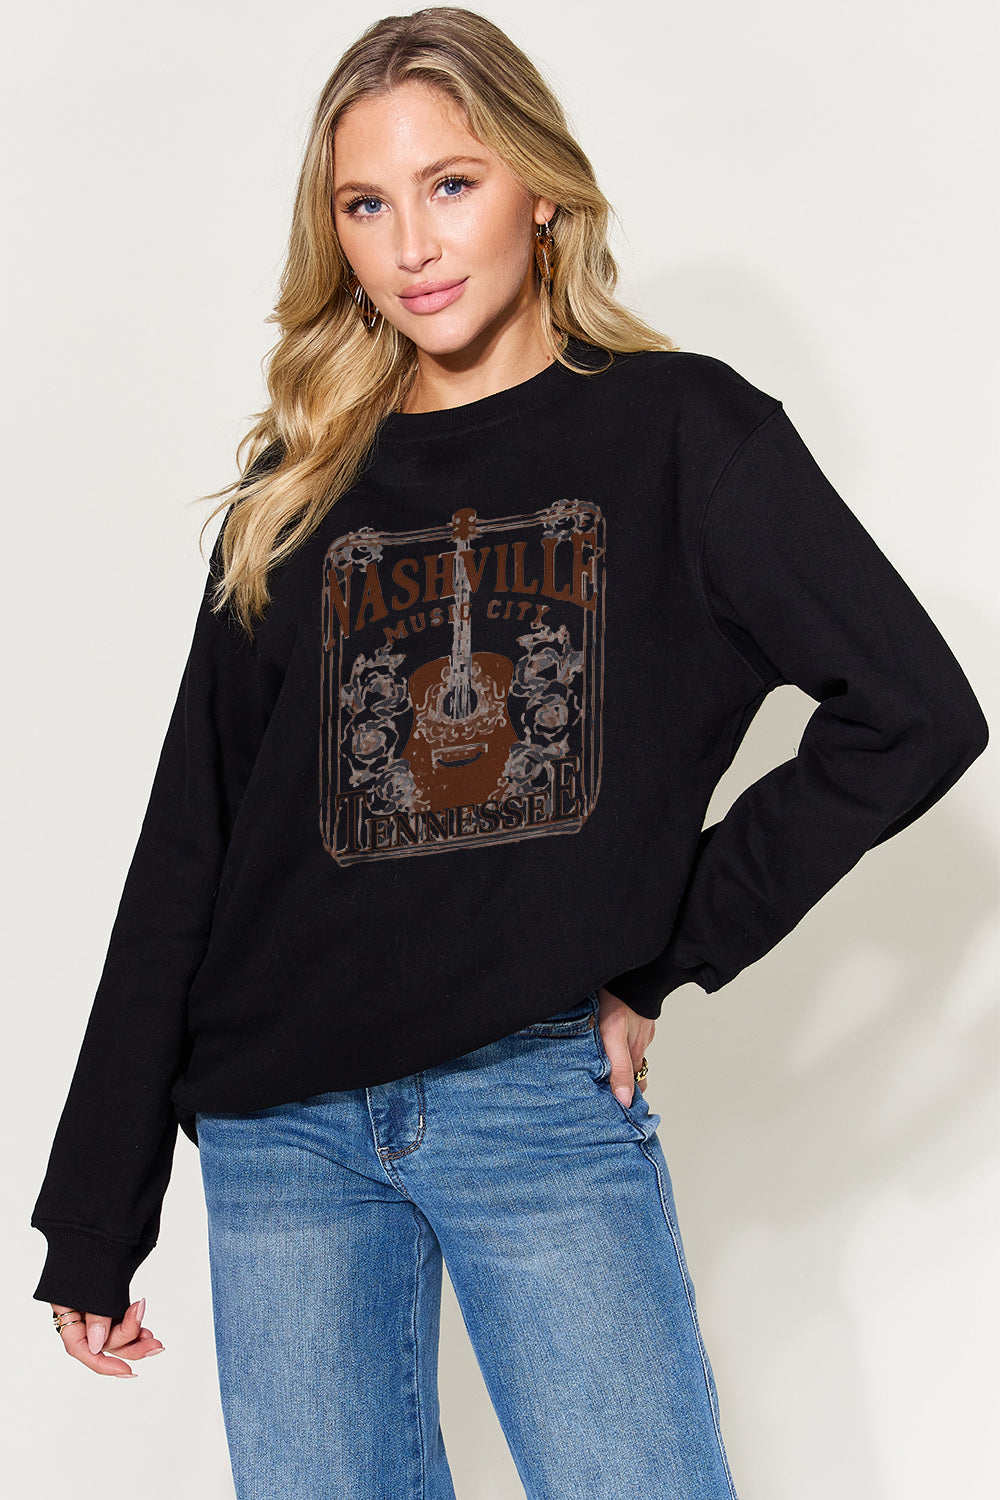 Simply Love Full Size Graphic Long Sleeve Sweatshirt  | KIKI COUTURE